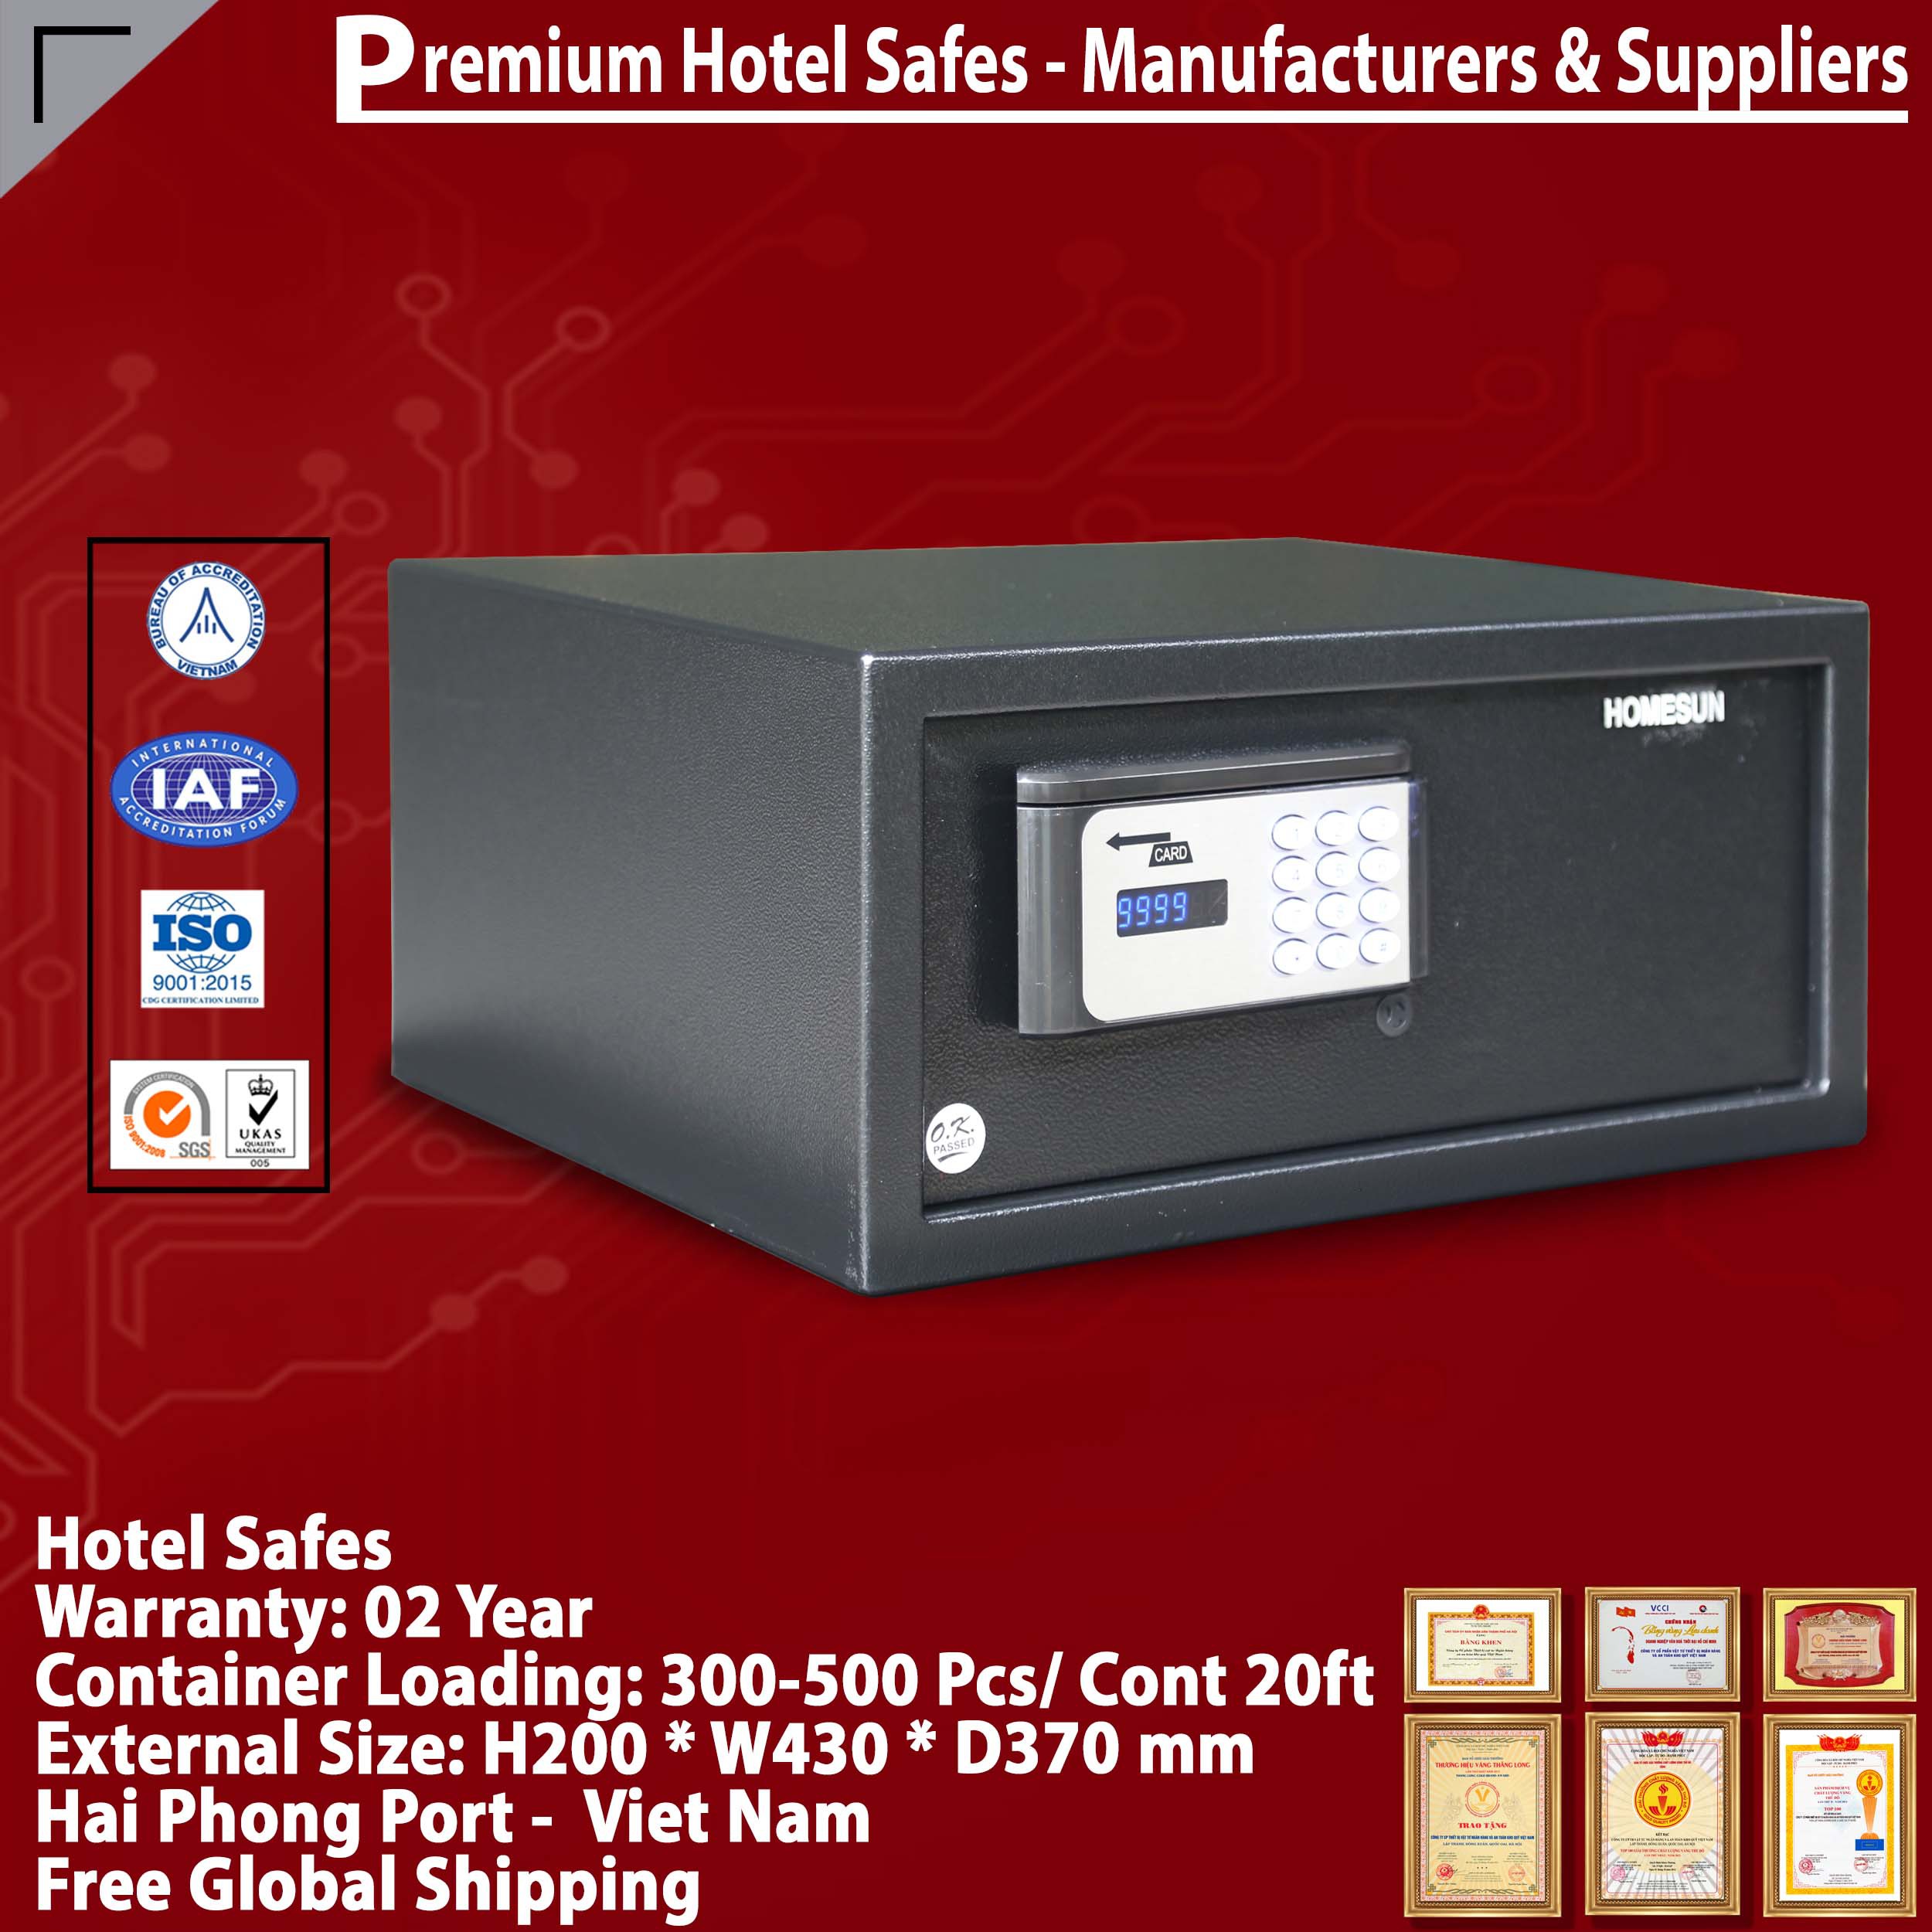 Safes in Hotel Manufacturing Facility